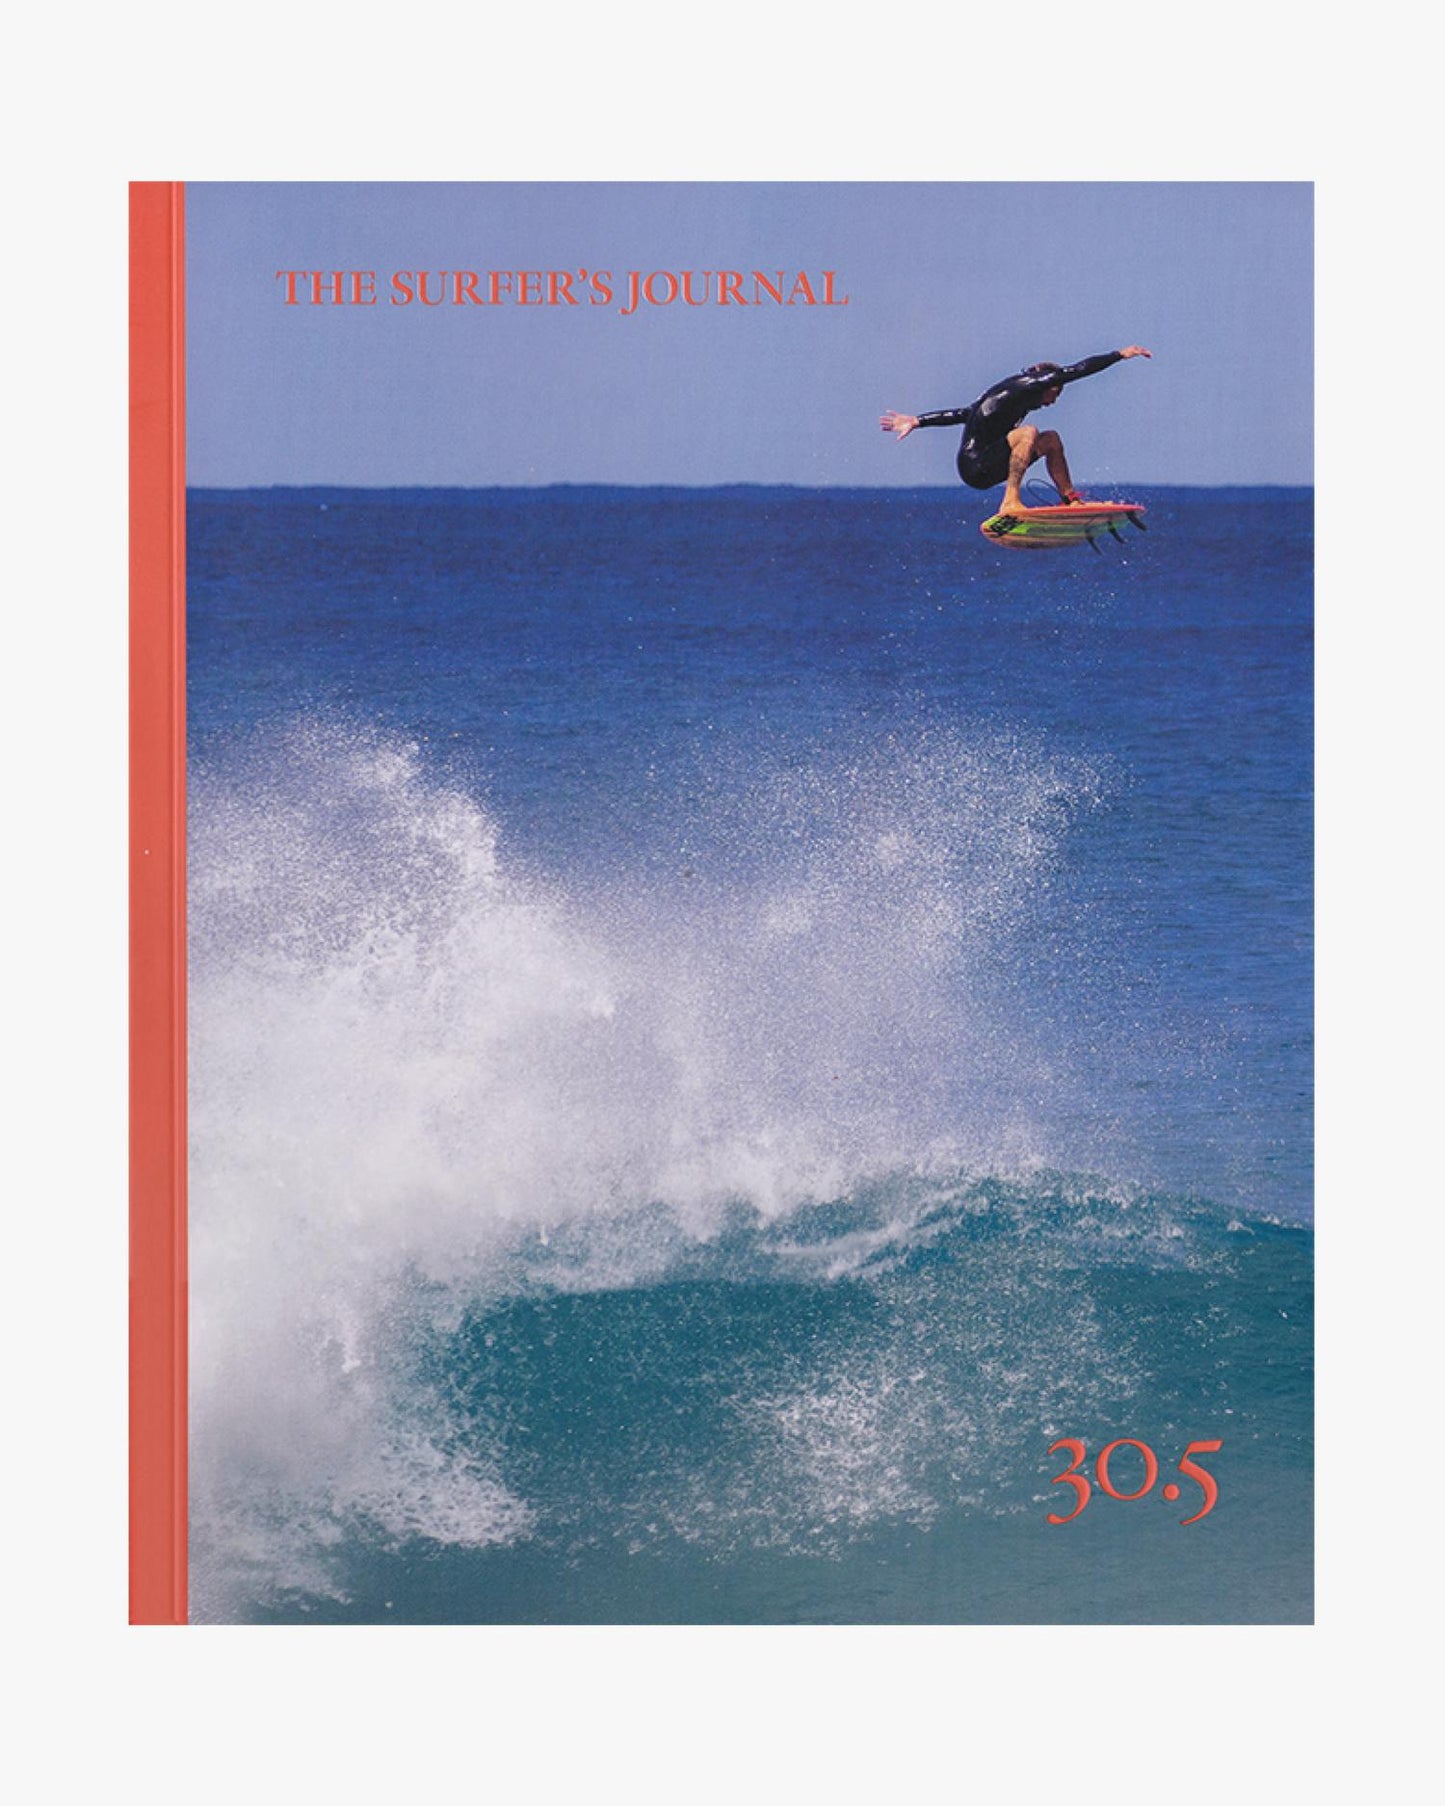 THE SURFERS JOURNAL - Volume 30 No. 5